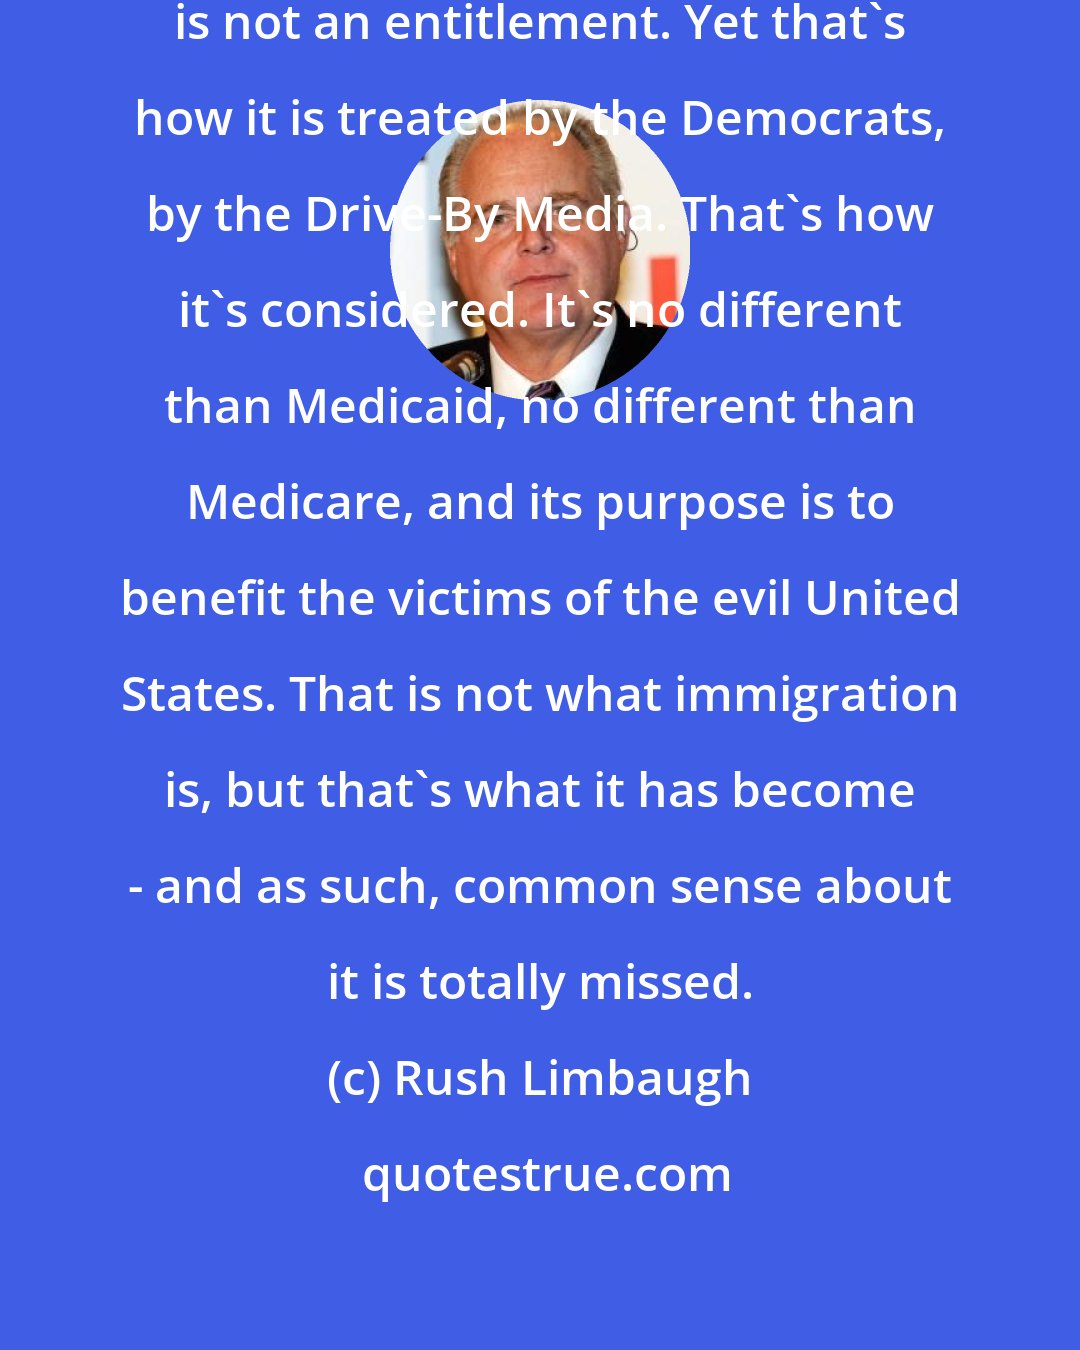 Rush Limbaugh: Immigration, ladies and gentlemen, is not an entitlement. Yet that's how it is treated by the Democrats, by the Drive-By Media. That's how it's considered. It's no different than Medicaid, no different than Medicare, and its purpose is to benefit the victims of the evil United States. That is not what immigration is, but that's what it has become - and as such, common sense about it is totally missed.